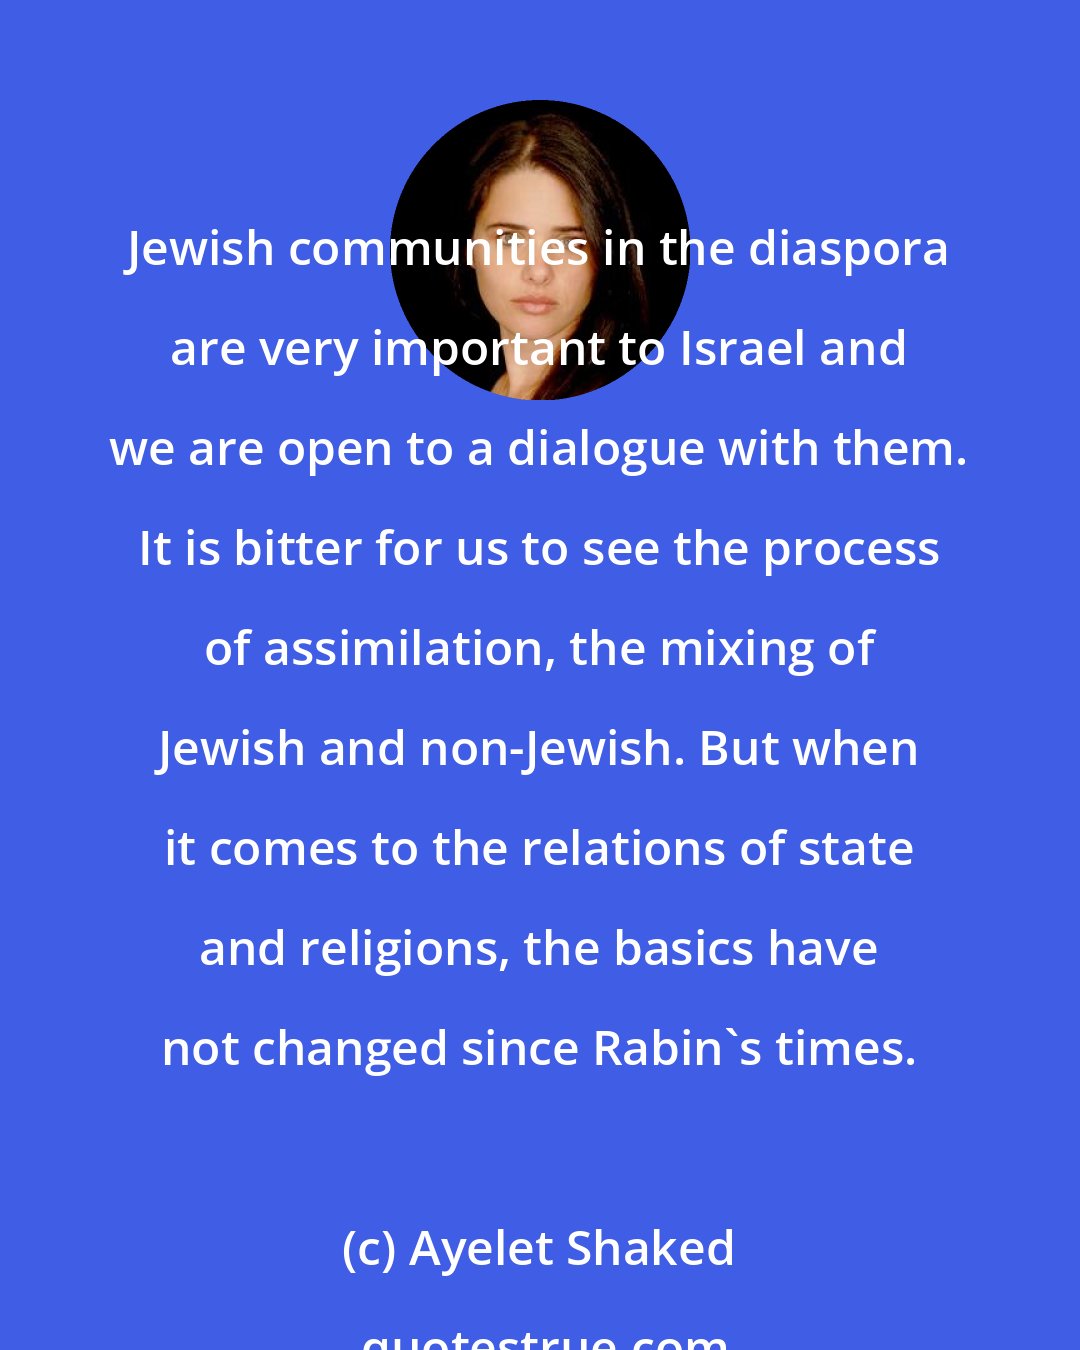 Ayelet Shaked: Jewish communities in the diaspora are very important to Israel and we are open to a dialogue with them. It is bitter for us to see the process of assimilation, the mixing of Jewish and non-Jewish. But when it comes to the relations of state and religions, the basics have not changed since Rabin's times.